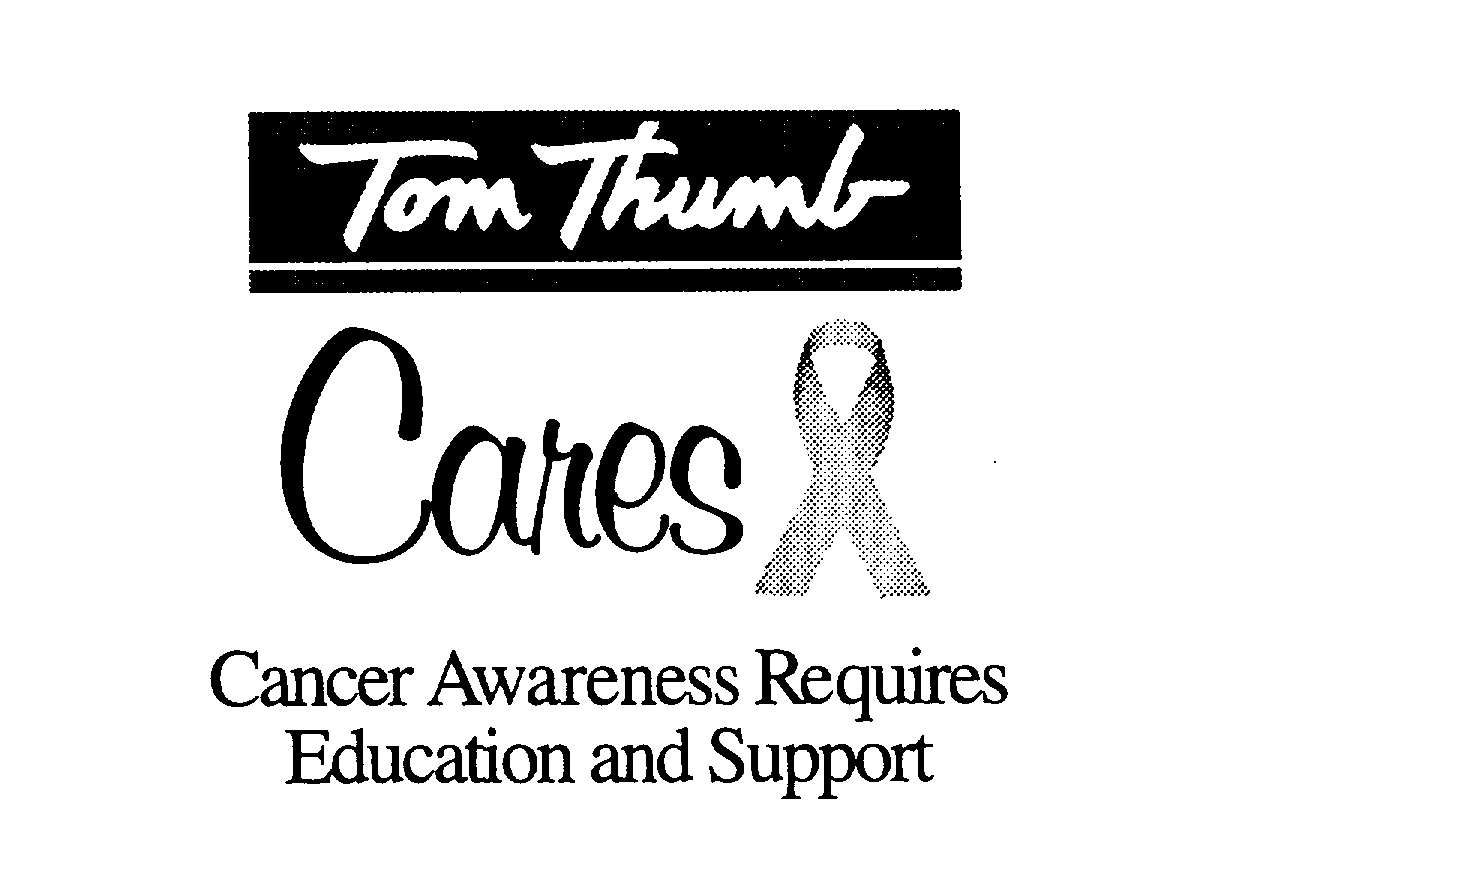  TOM THUMB CARES CANCER AWARENESS REQUIRES EDUCATION AND SUPPORT